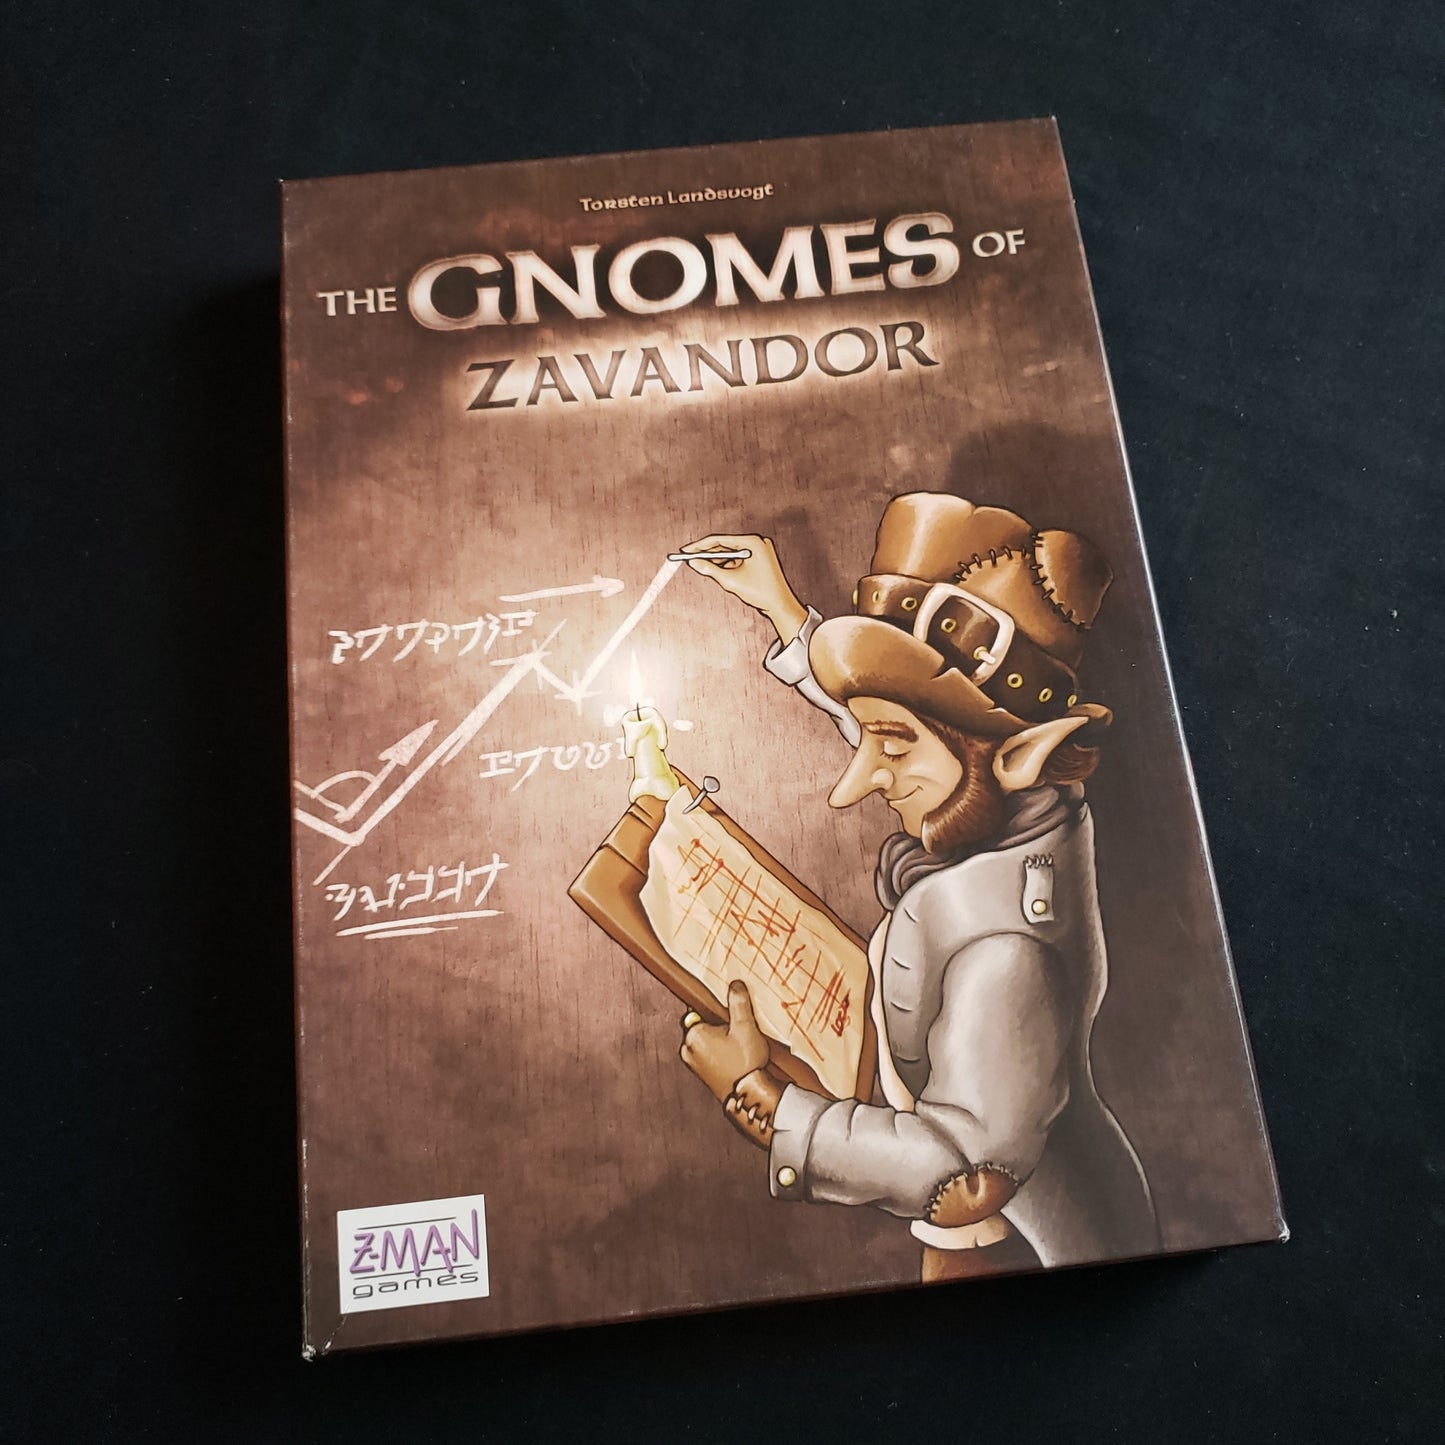 Image shows the front cover of the box of the Gnomes of Zavandor board game